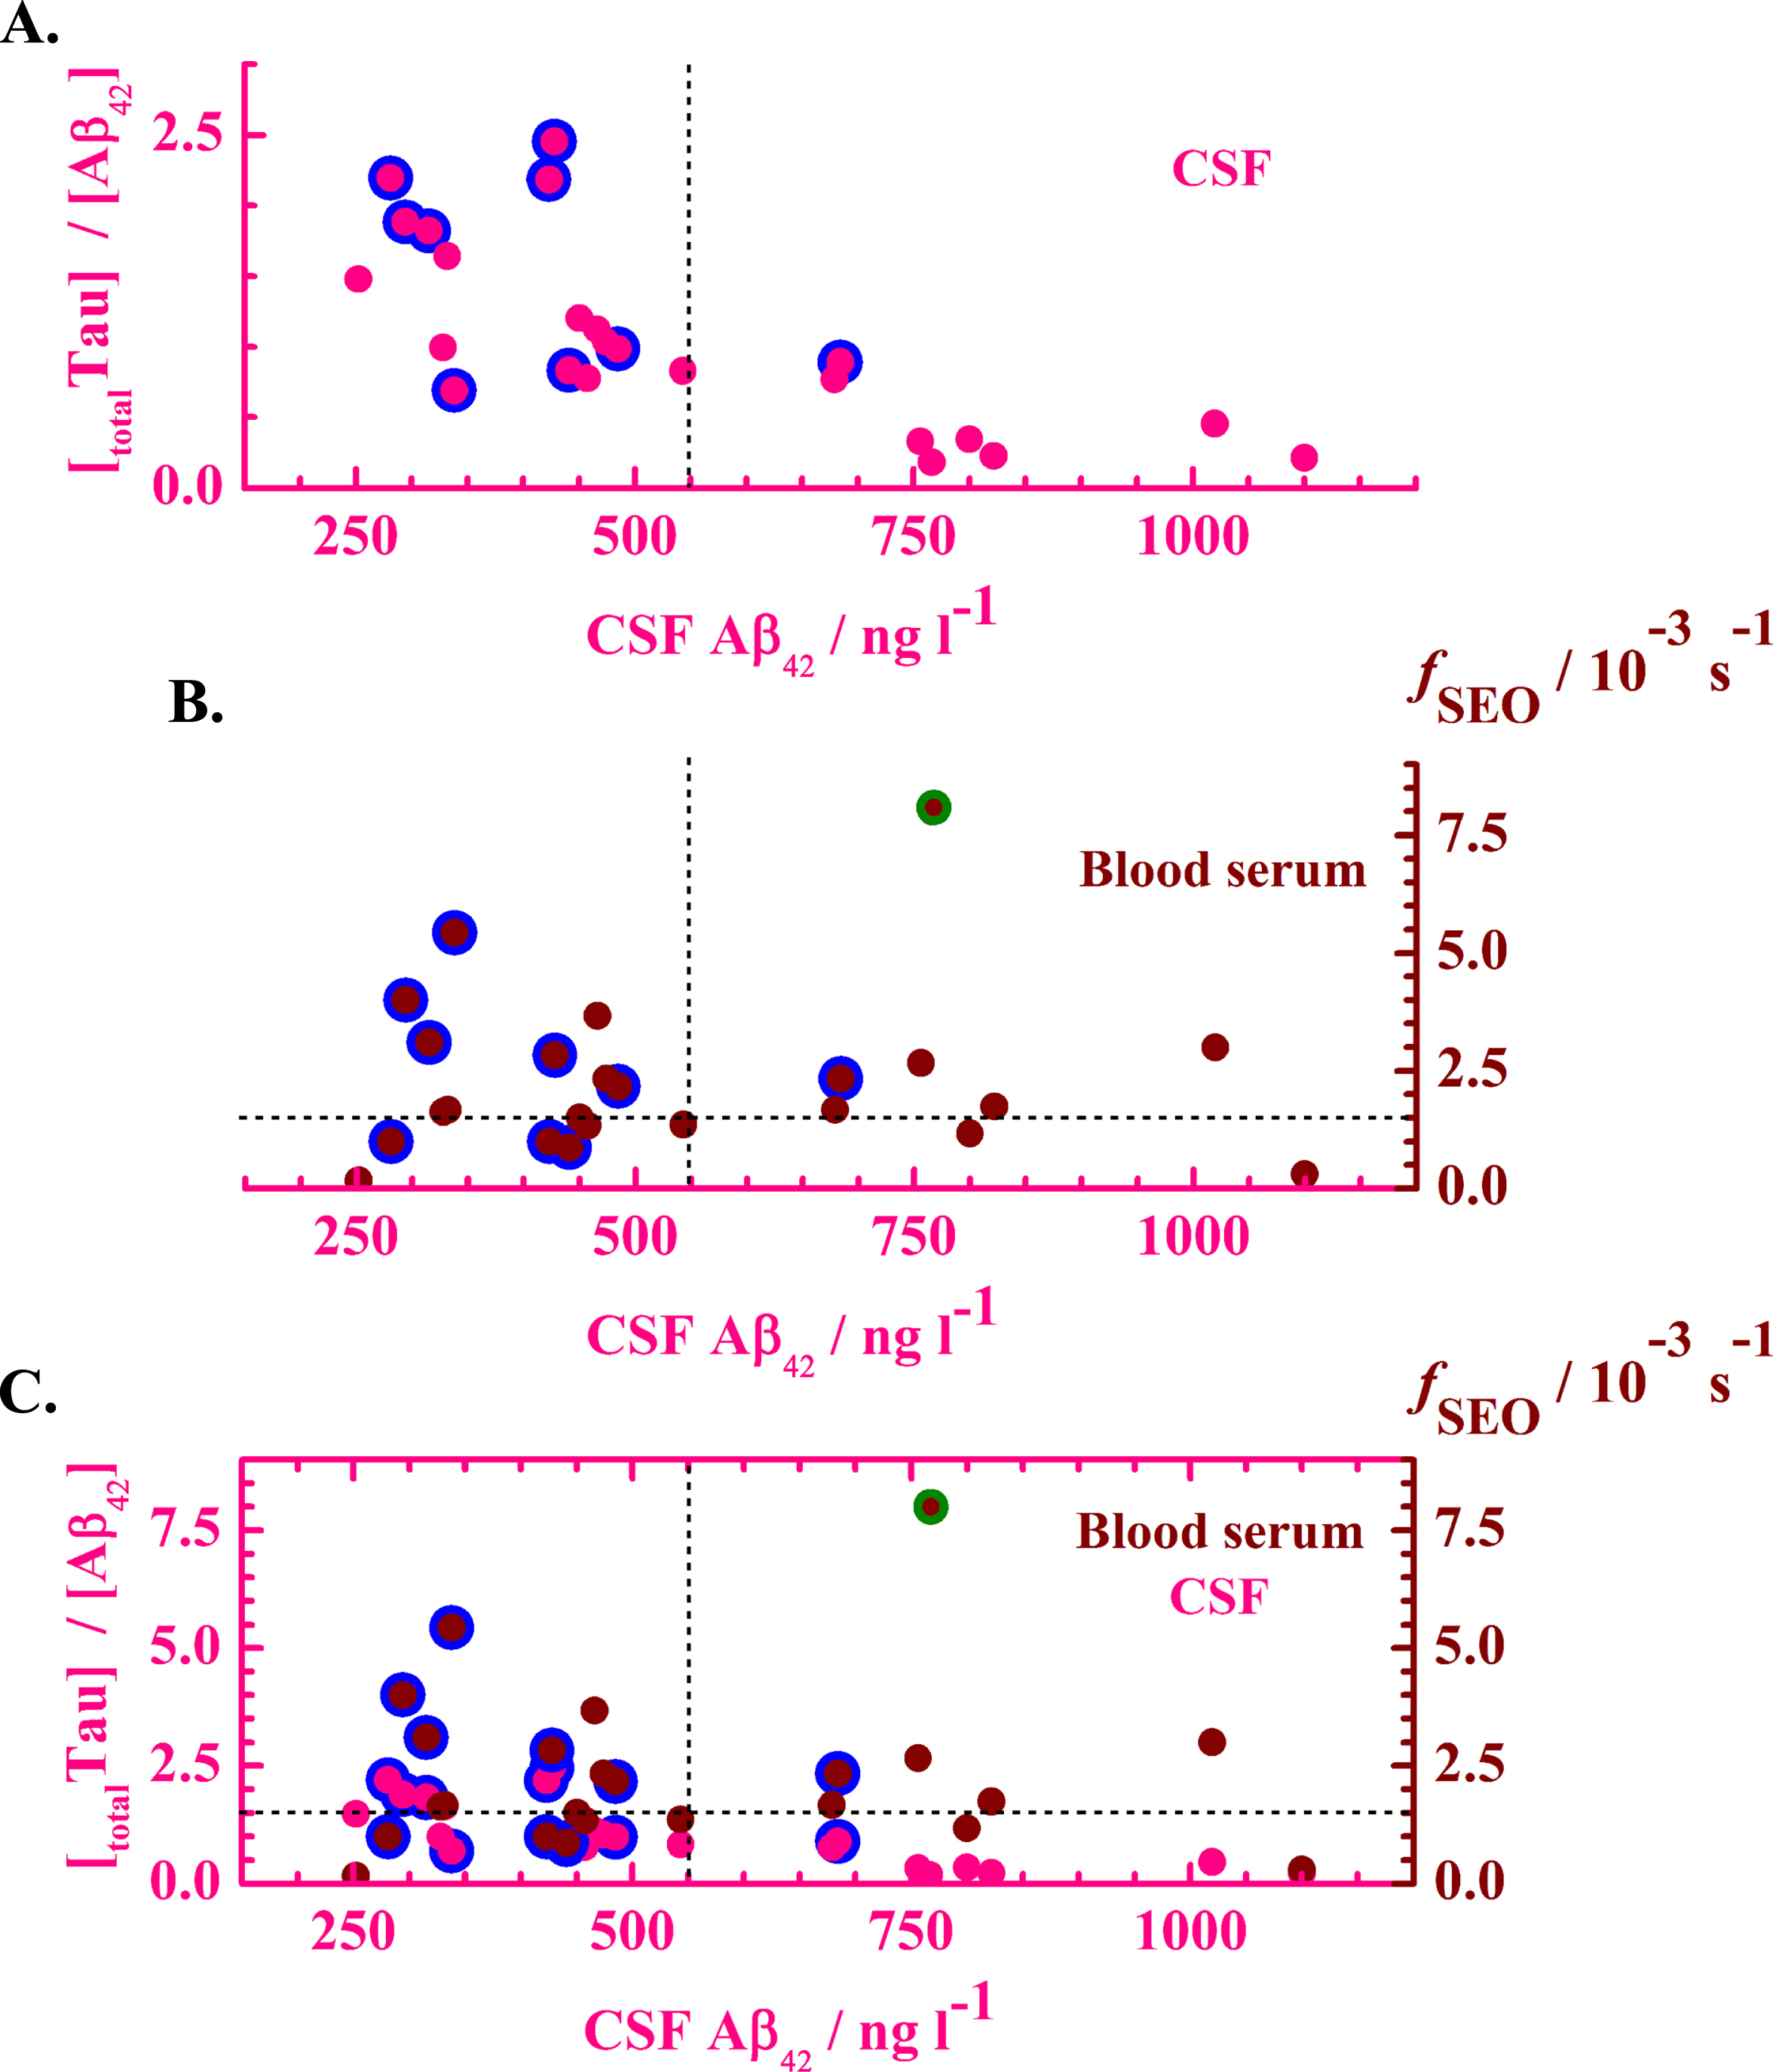 Correlation between clinical CSF parameters and the fSEO in blood serum. A) The ratio of the total Tau level over Aβ42 level in the CSF as a function of the Aβ42 level in the CSF. Pink dots with a blue rim designate data from individuals diagnosed with AD. B) The fSEO in the blood serum as a function of the Aβ42 level in the CSF. Blue-lined wine dots designate data from individuals diagnosed with AD, whereas wine dots indicate data from individuals in the patient cohort that were not diagnosed with AD. C) Comparison between CSF and blood serum measurements. Pink axes and symbols relate to measurements in the CSF, showing the ratio of the total Tau level over Aβ42 level in the CSF as a function of the Aβ42 level in the CSF. Wine ordinate and symbols relate to measurements in the blood serum. Wine symbols present the fSEO in the blood serum as a function of the Aβ42 level in the CSF. Data from individuals diagnosed with AD based on a multimodal clinical assessment are represented by the blue-lined wine dots. The green-lined point indicates the value from a patient with gastric bypass. In all graphs, the vertical dashed line indicates the generally accepted limit for an AD diagnosis based on Aβ42 level in CSF, [Aβ42] < 550 ng l–1. The horizontal dashed line indicates the limit of fSEO > 1.5×10–3 s–1 in blood serum that is indicative of AD.